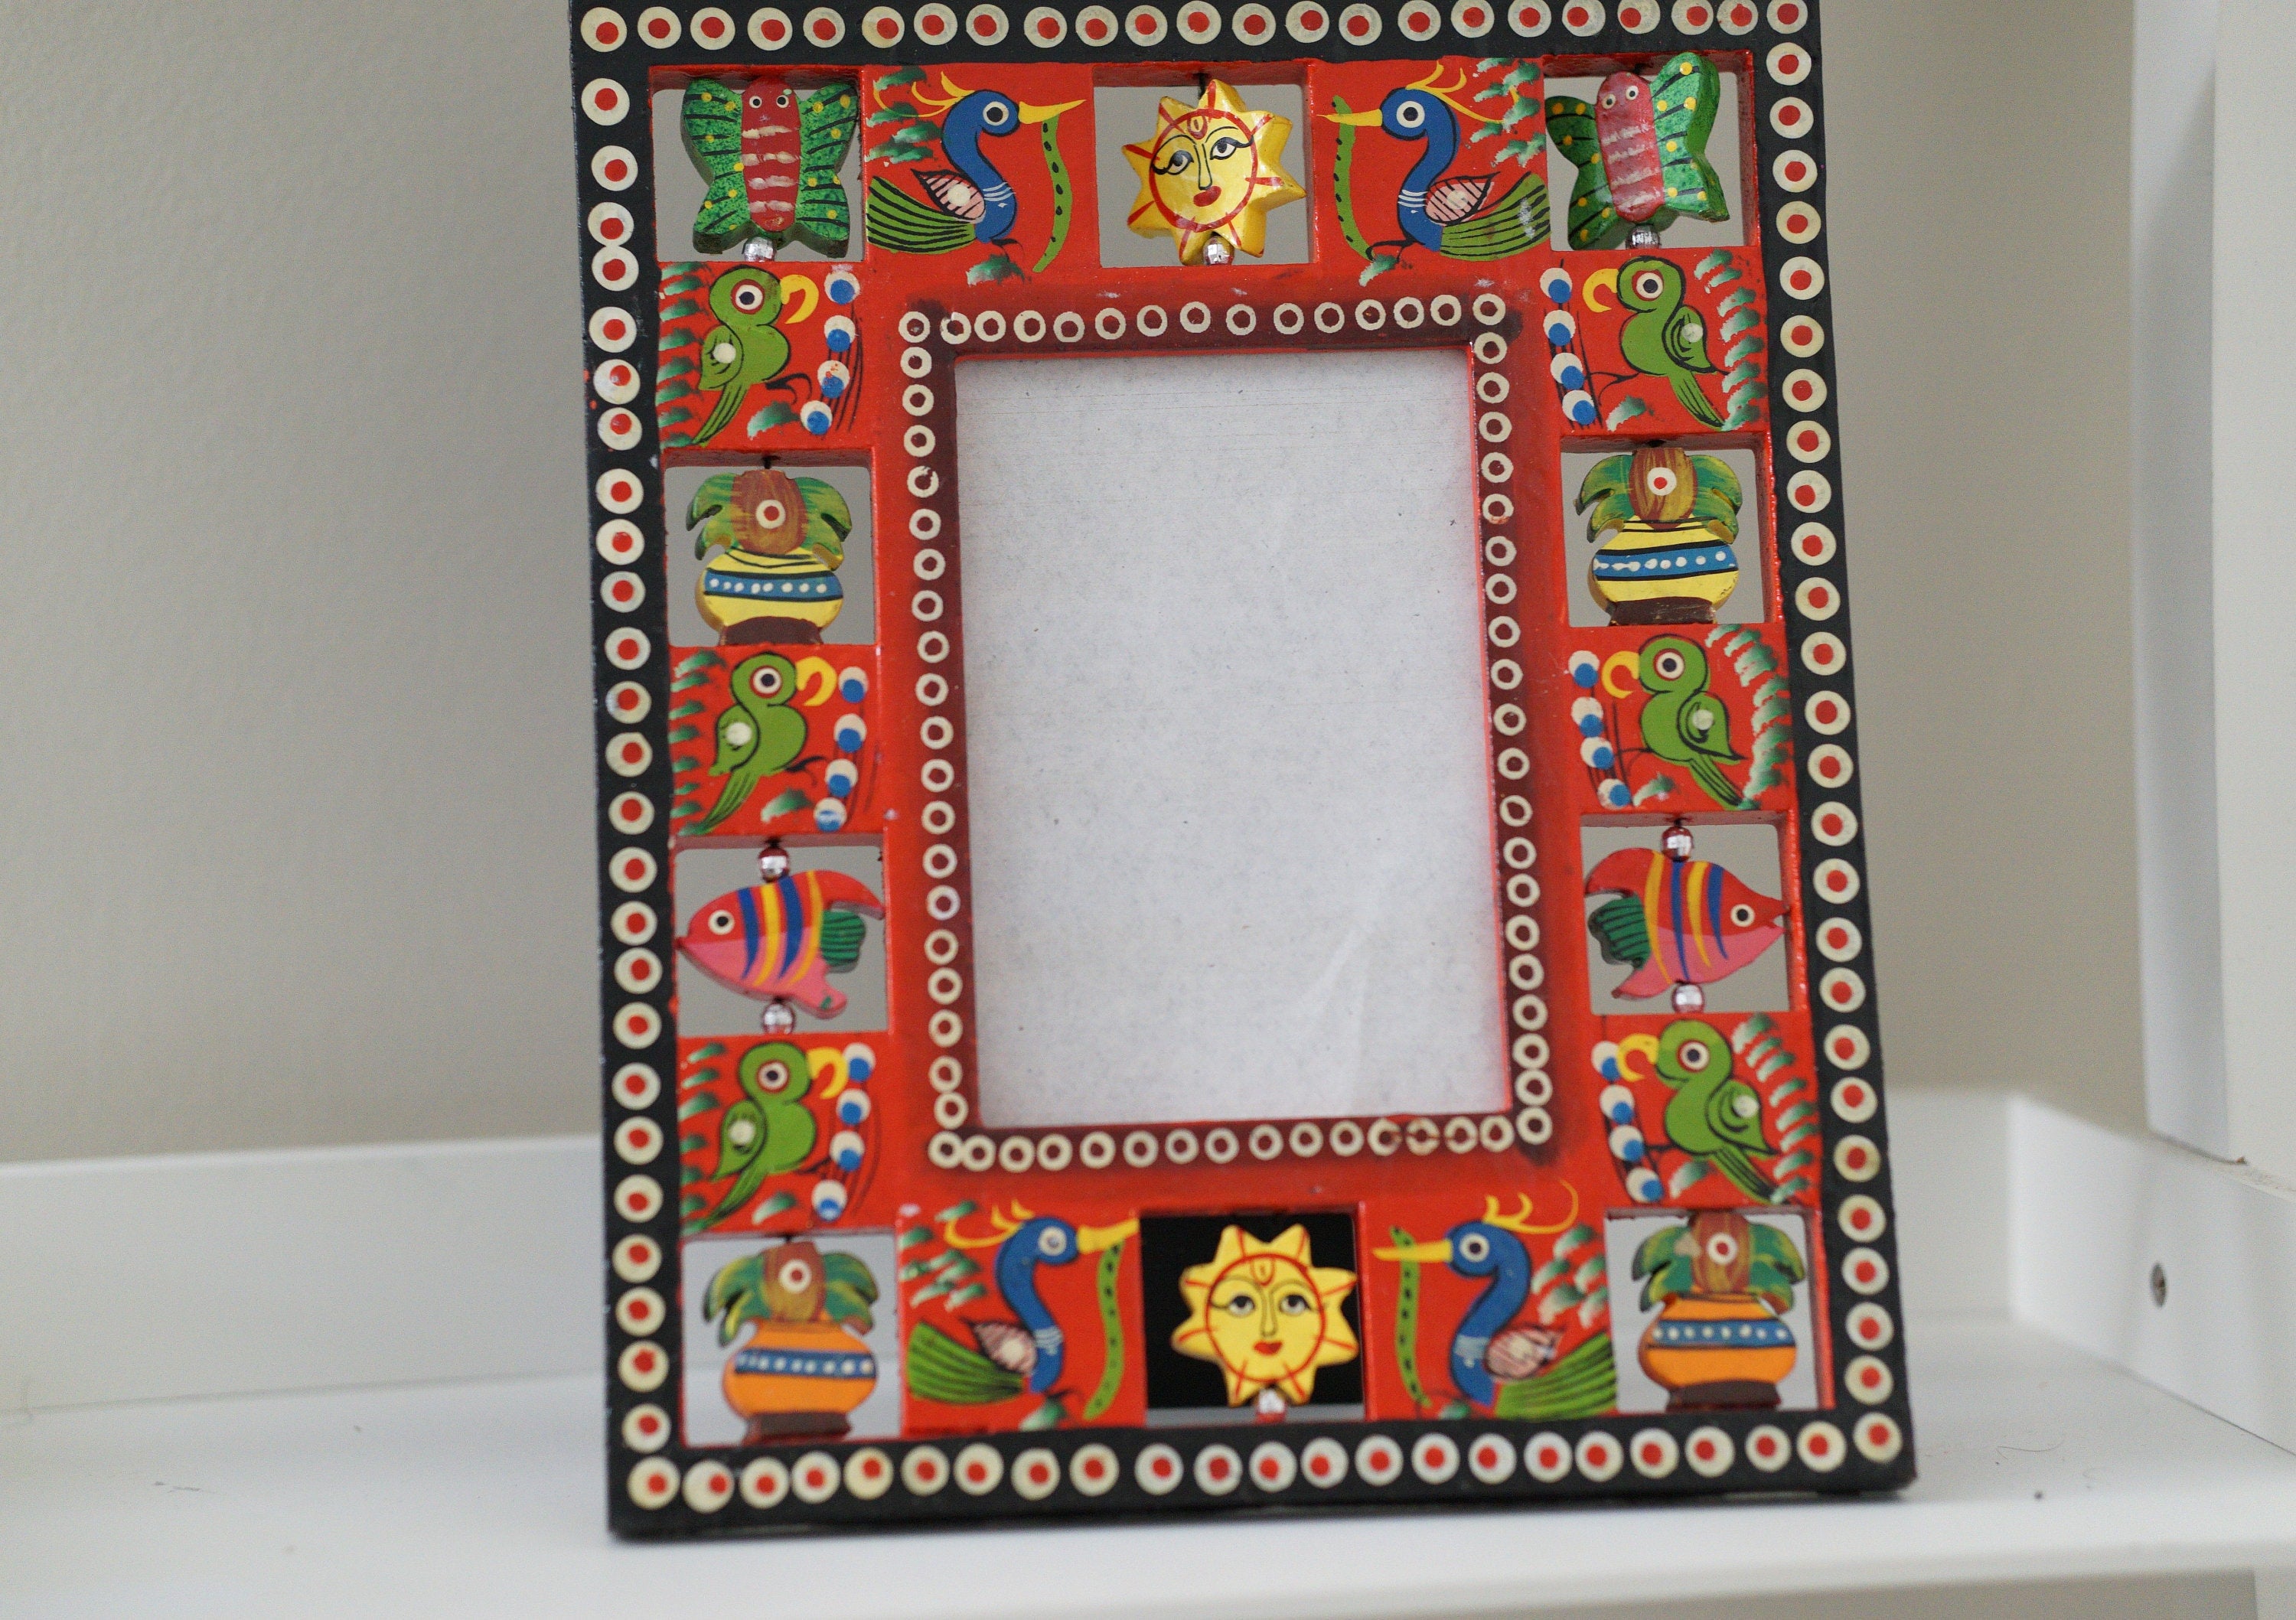 Colorful wooden photo frame with painted rotatable birds and figurines